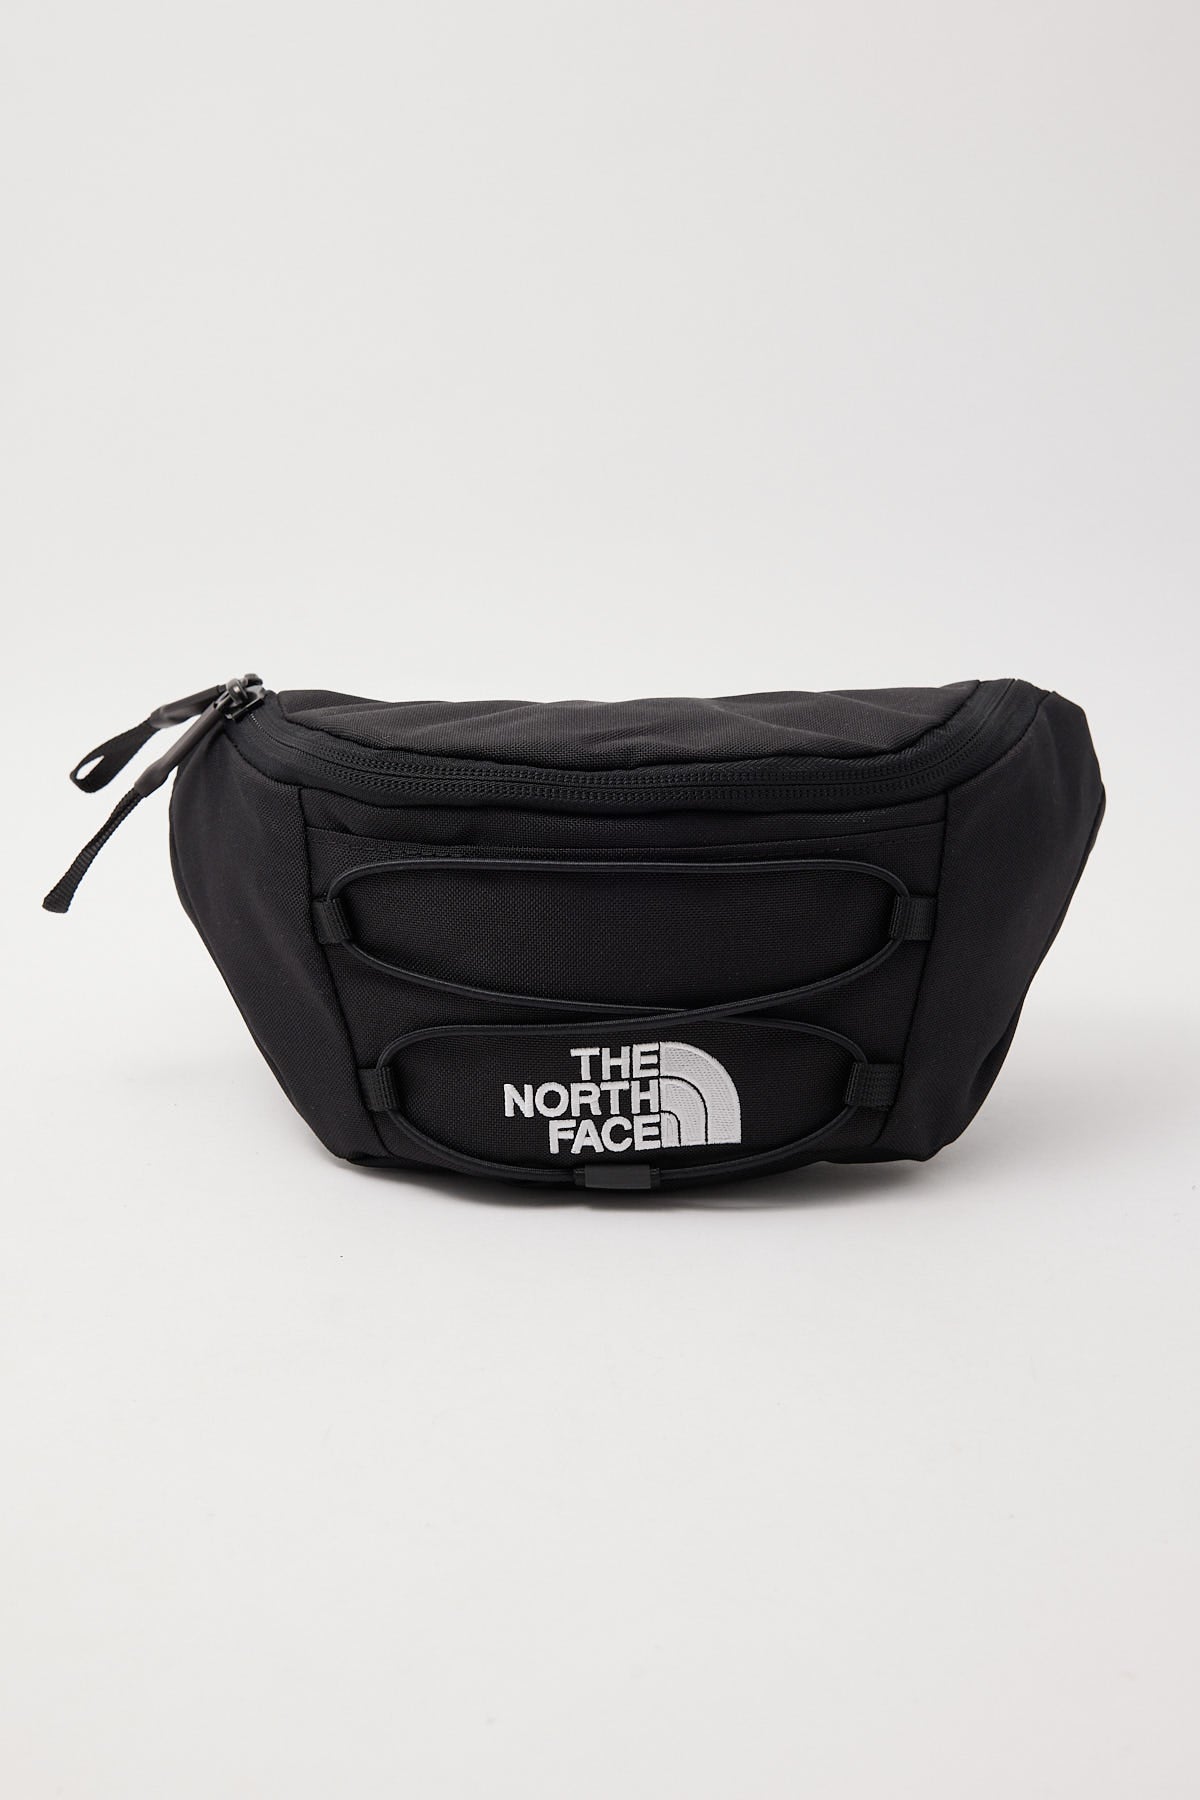 The North Face Jester Lumbar Black